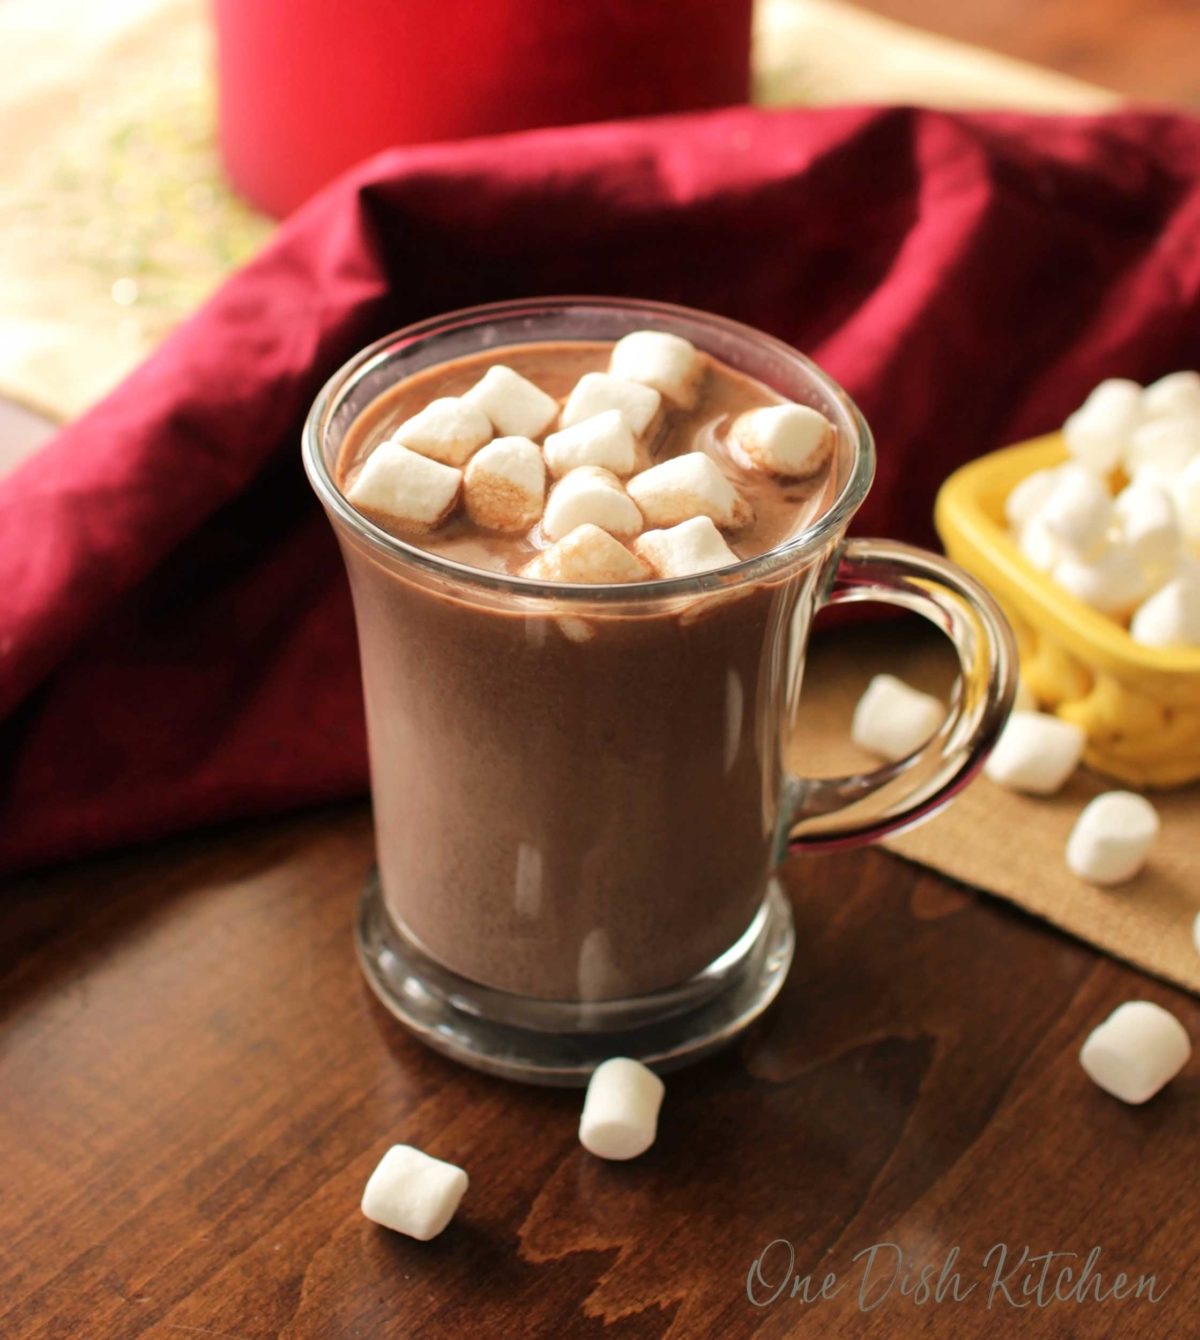 a mug of hot chocolate next to marshmallows in a container that have spilled onto the table.